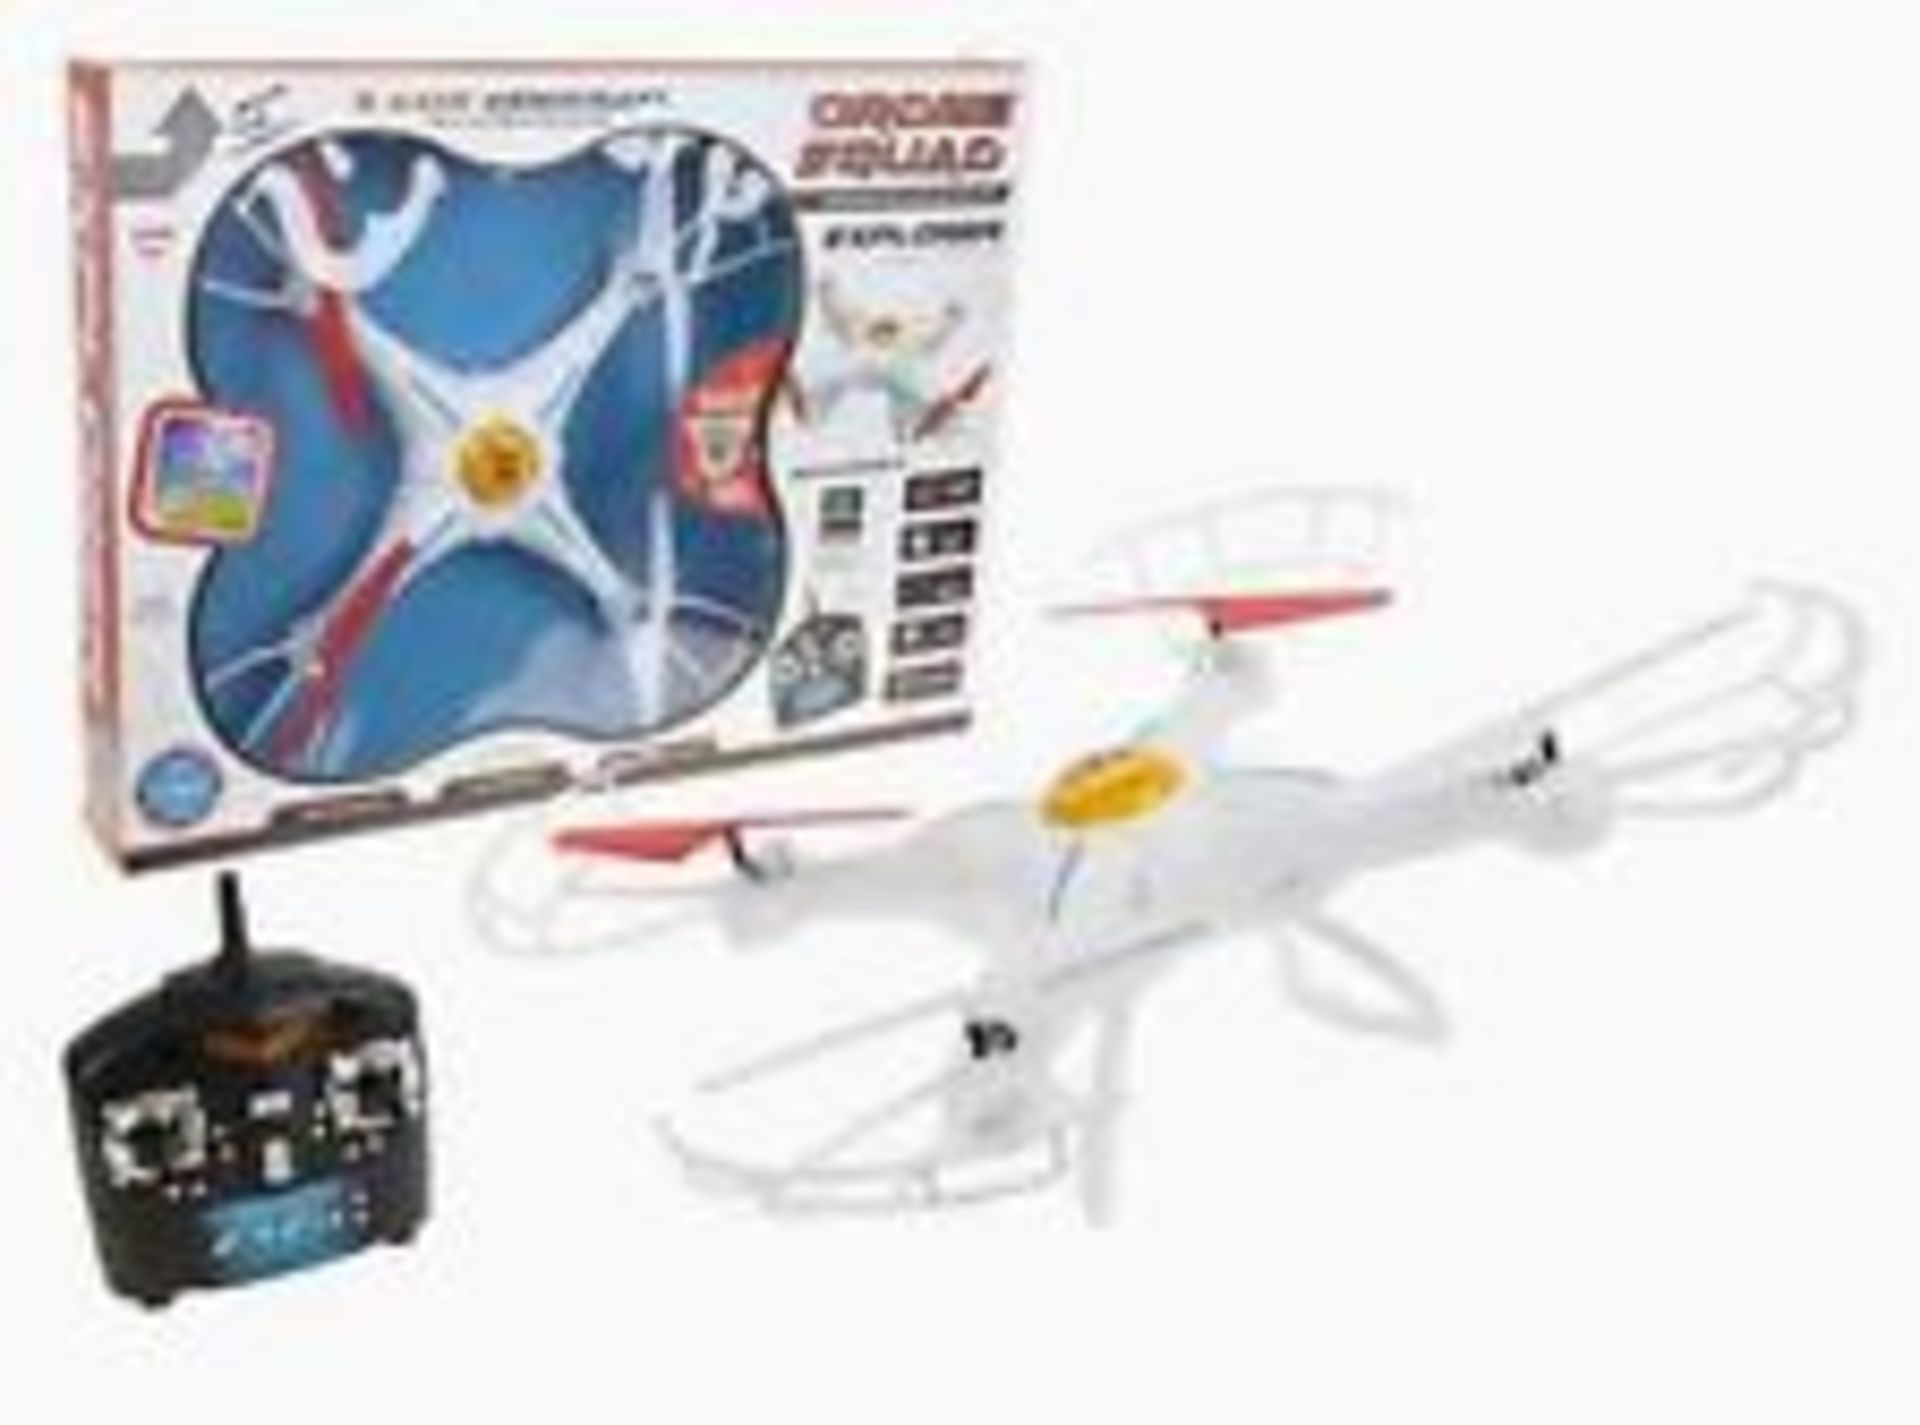 V Brand New Very Large Drone Squad Explorer Quadcopter Drone "Throw To Fly Immediately" With 360